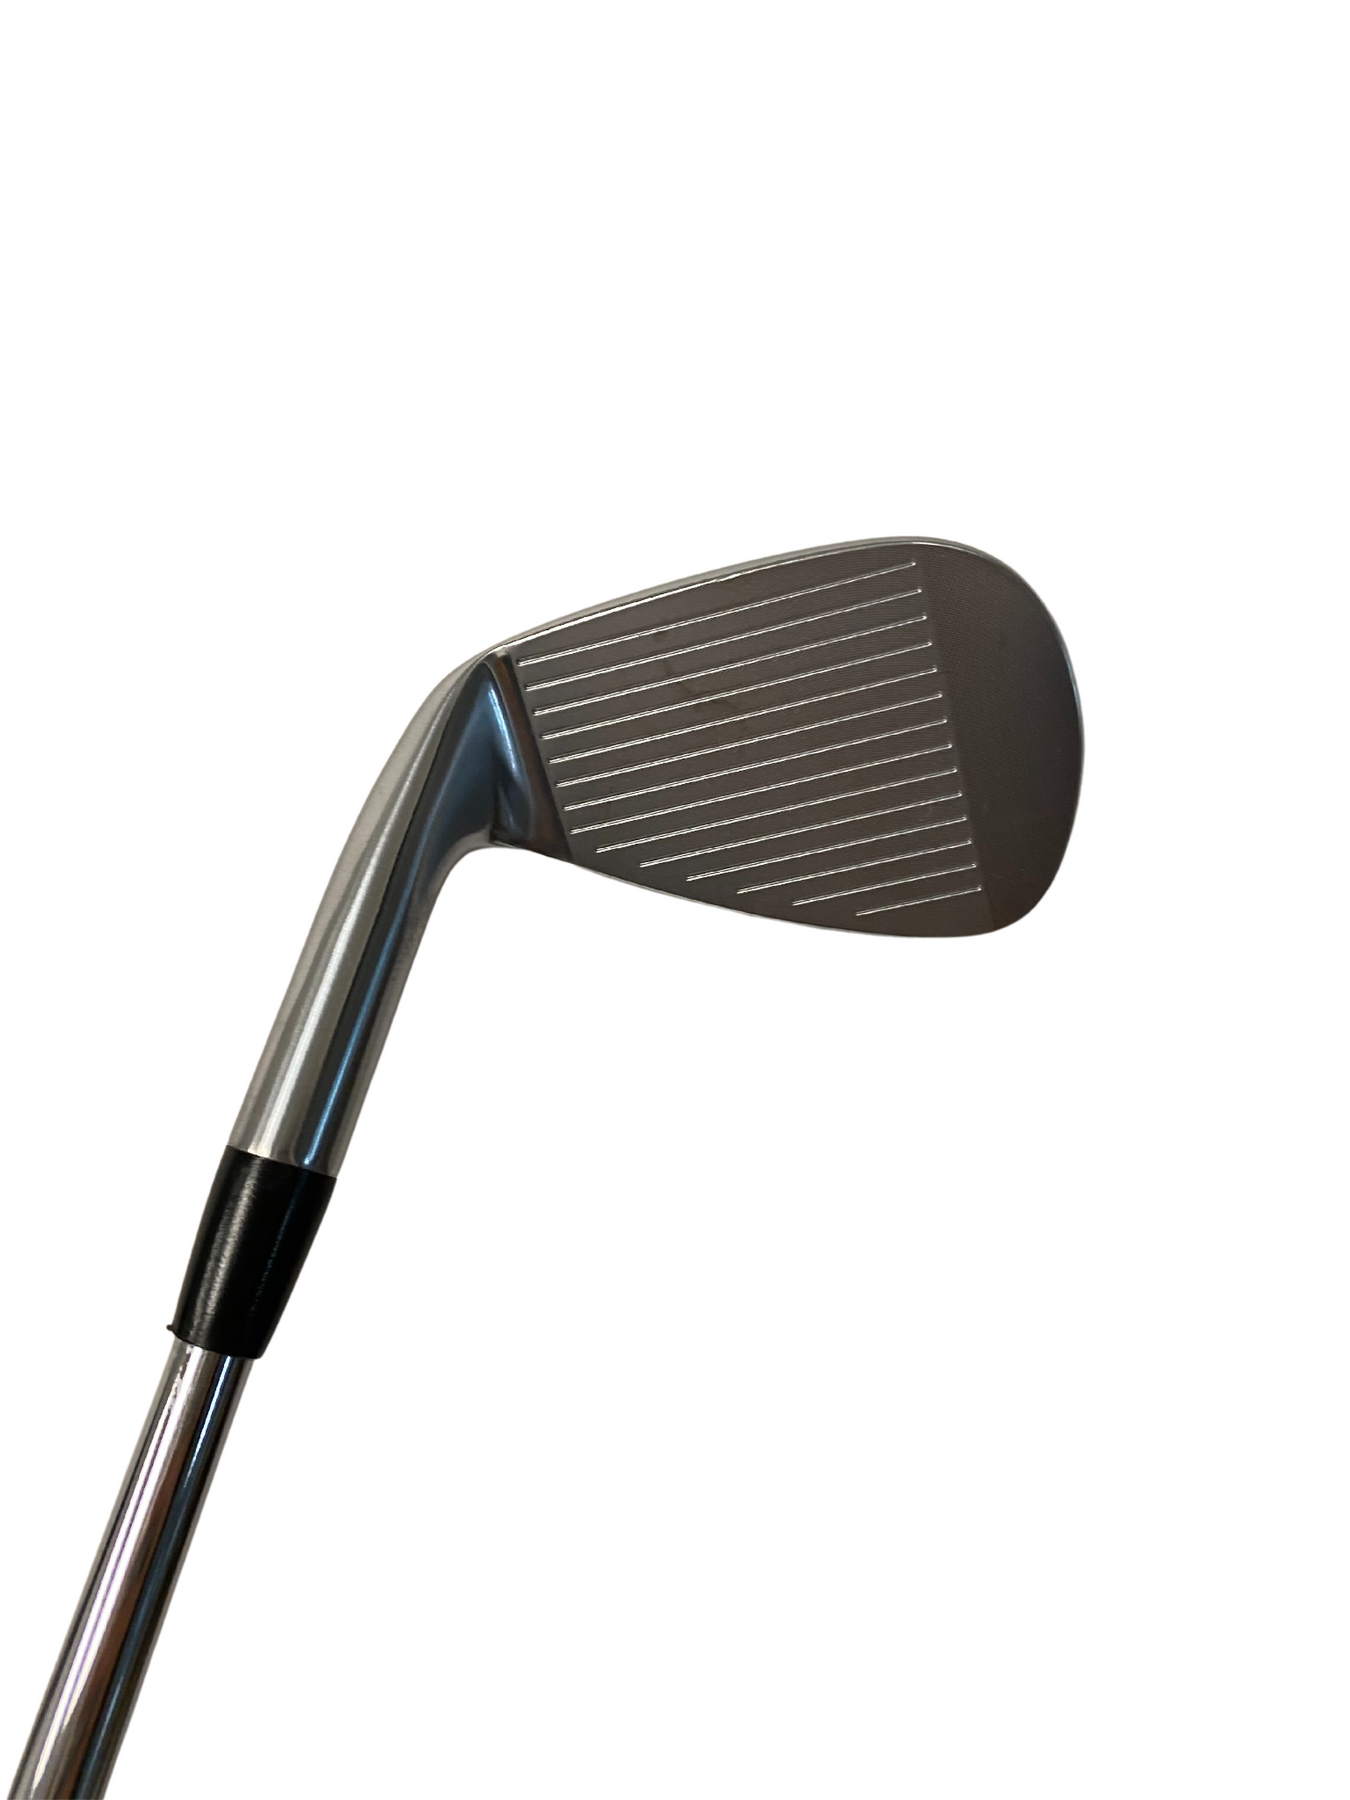 TaylorMade P730 Pitching Wedge, Steel Dynamic Gold Tour Issue X 